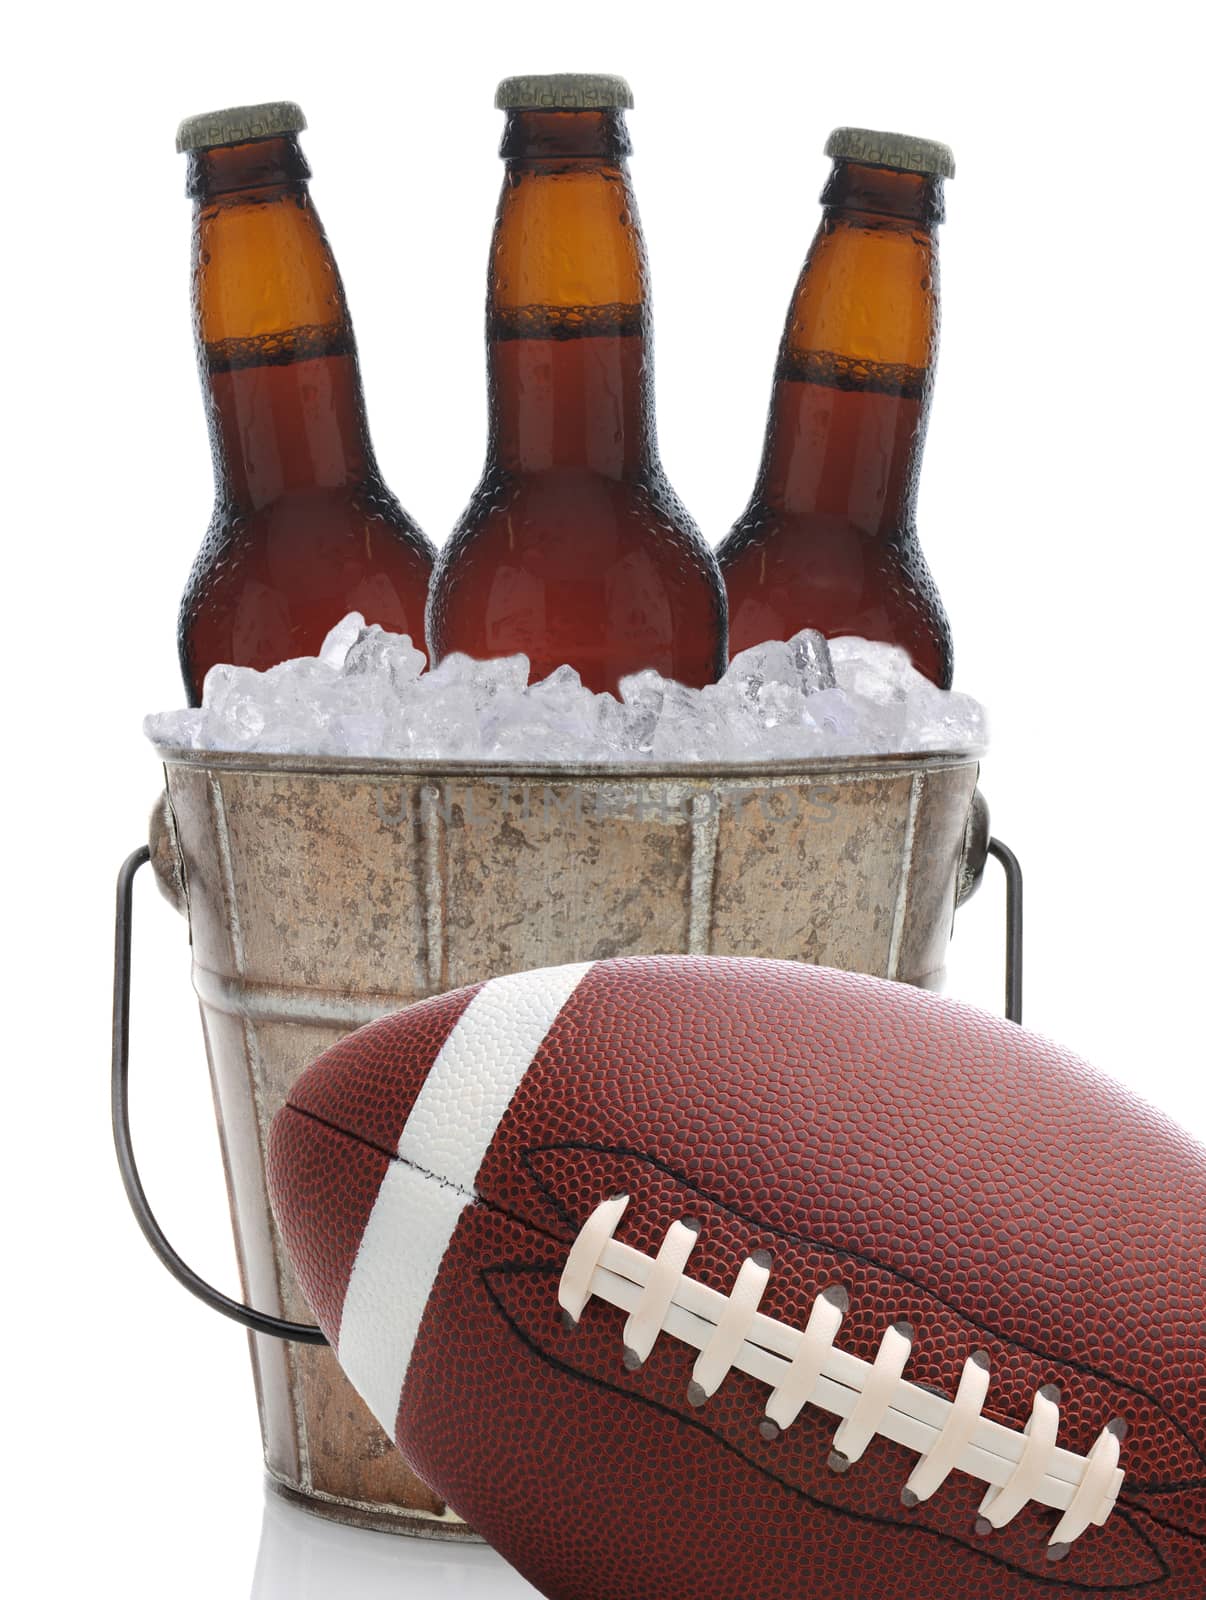 An old metal bucket with three brown beer bottles covered in condensation on a white background. An American football at an angle sits in front of the pail.